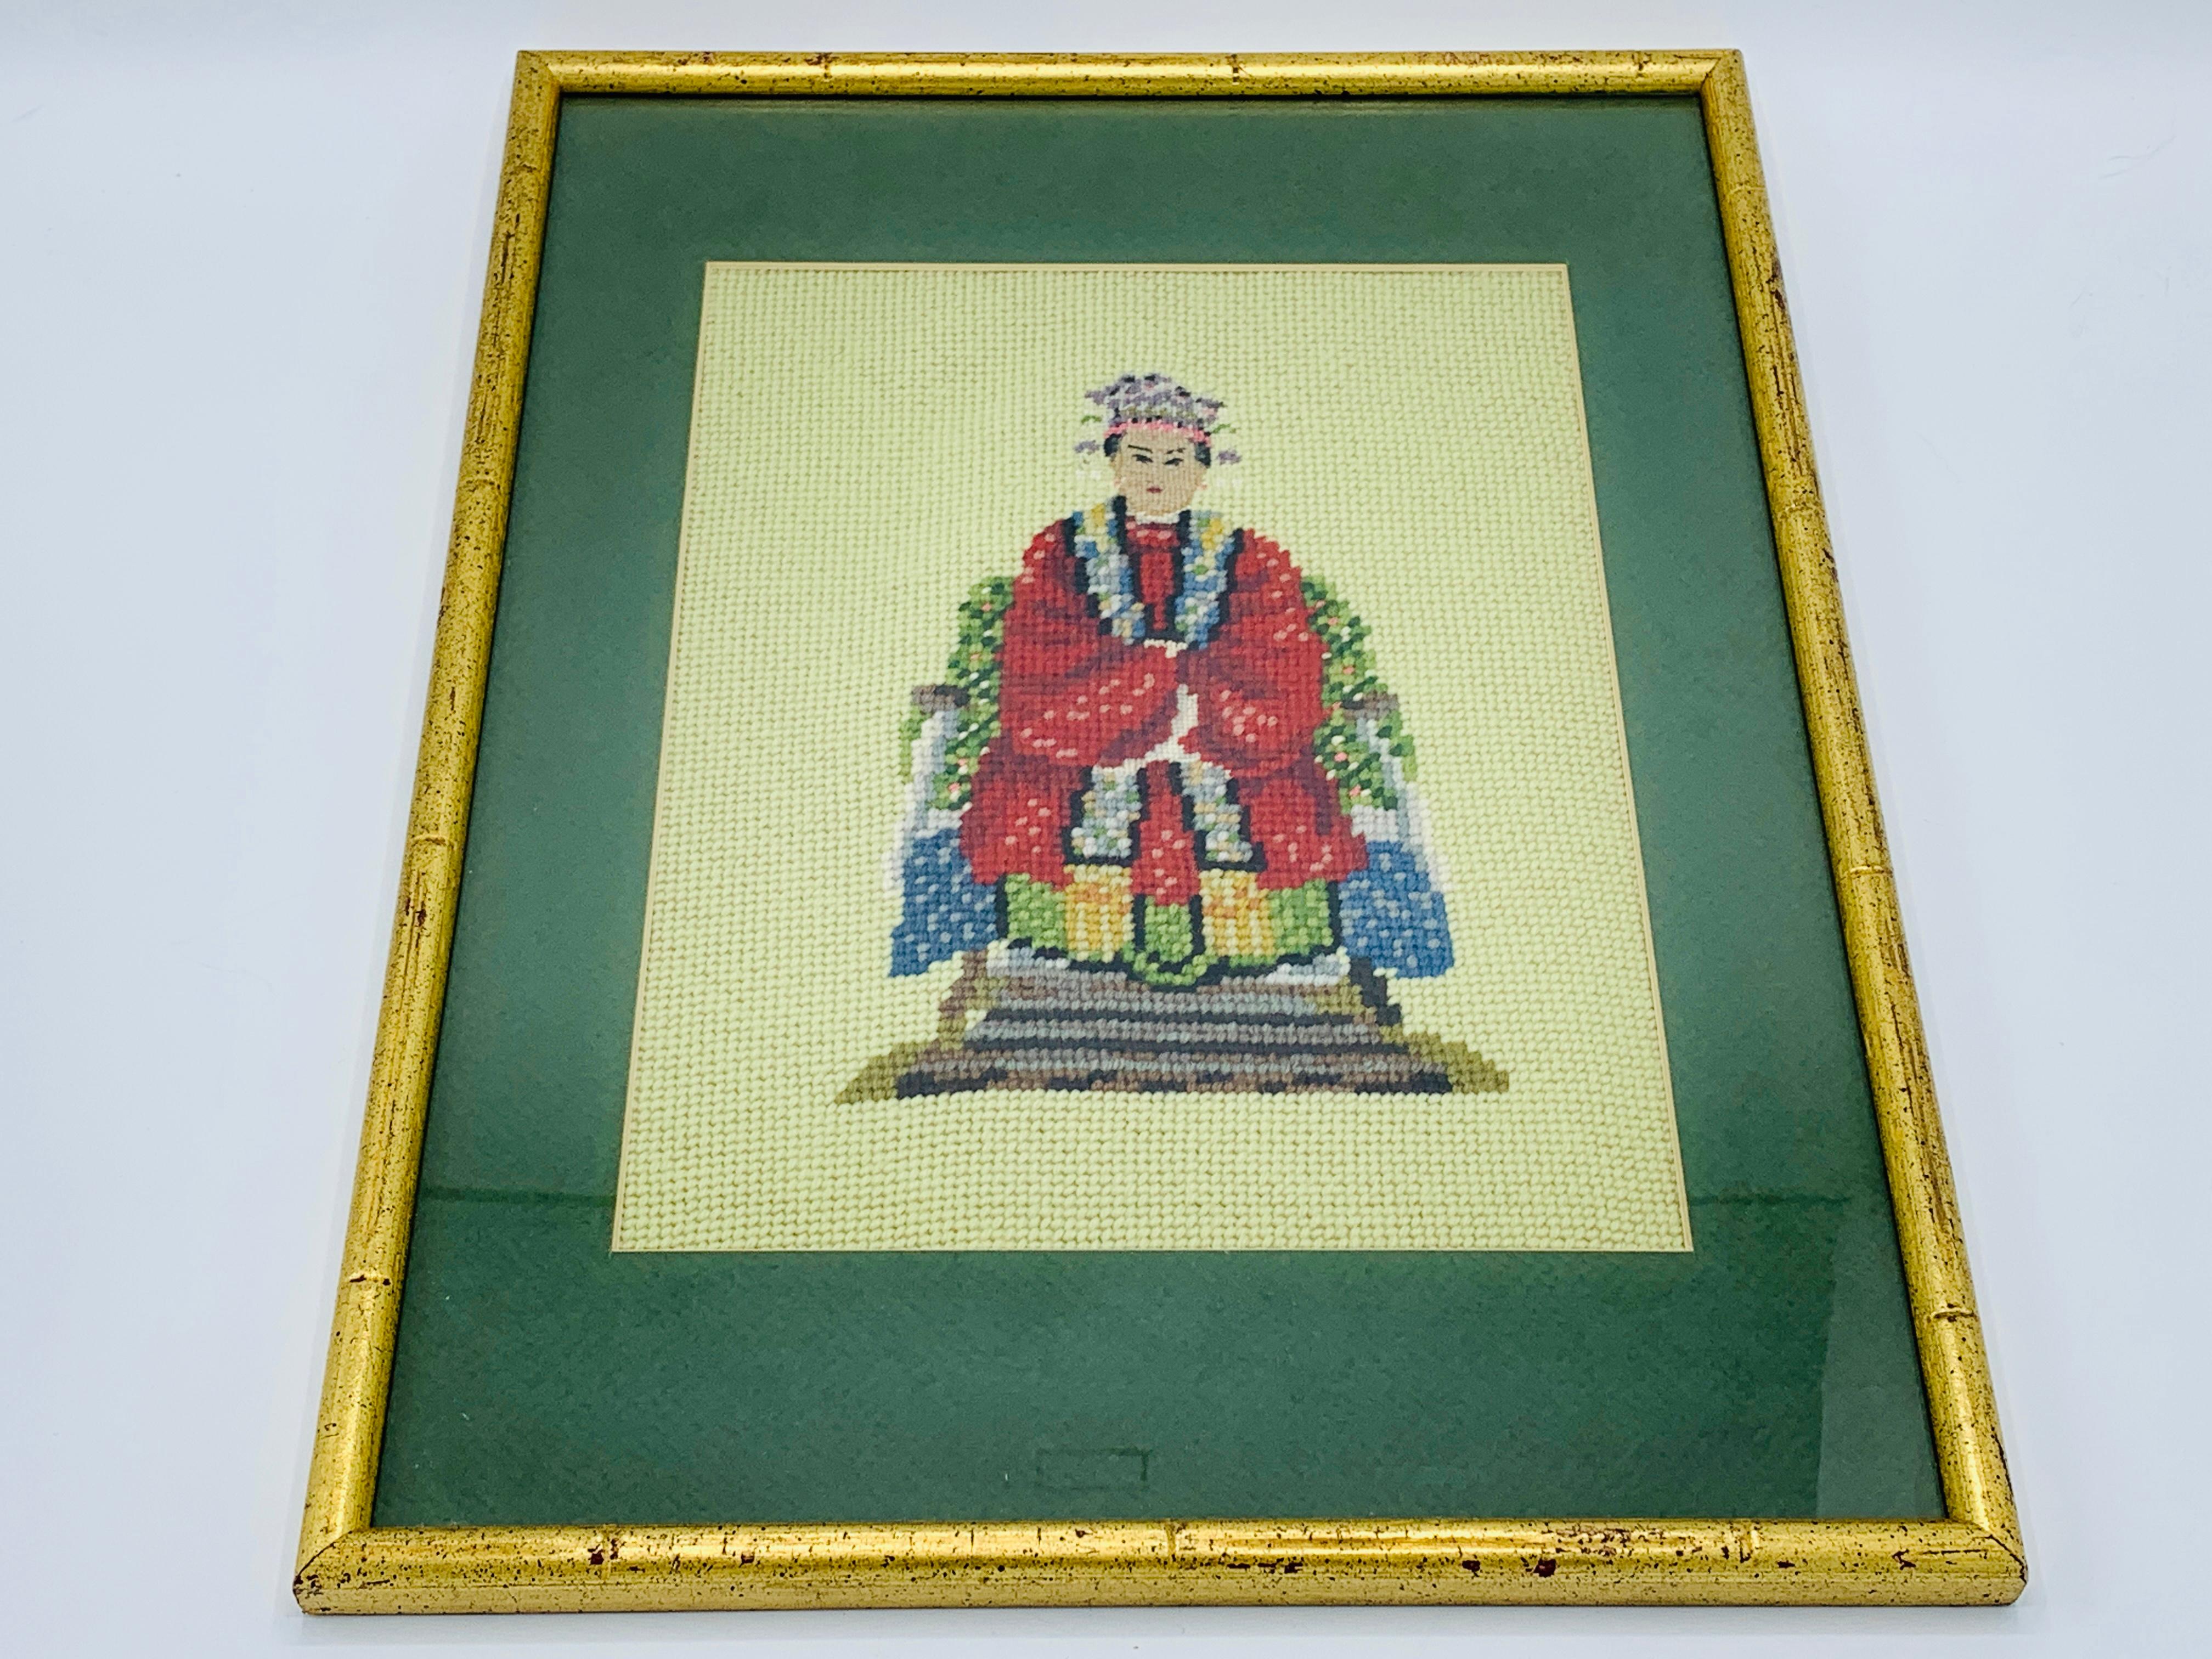 1960s Chinoiserie Emperor and Empress Framed Needlepoint Textile Art, Pair For Sale 5